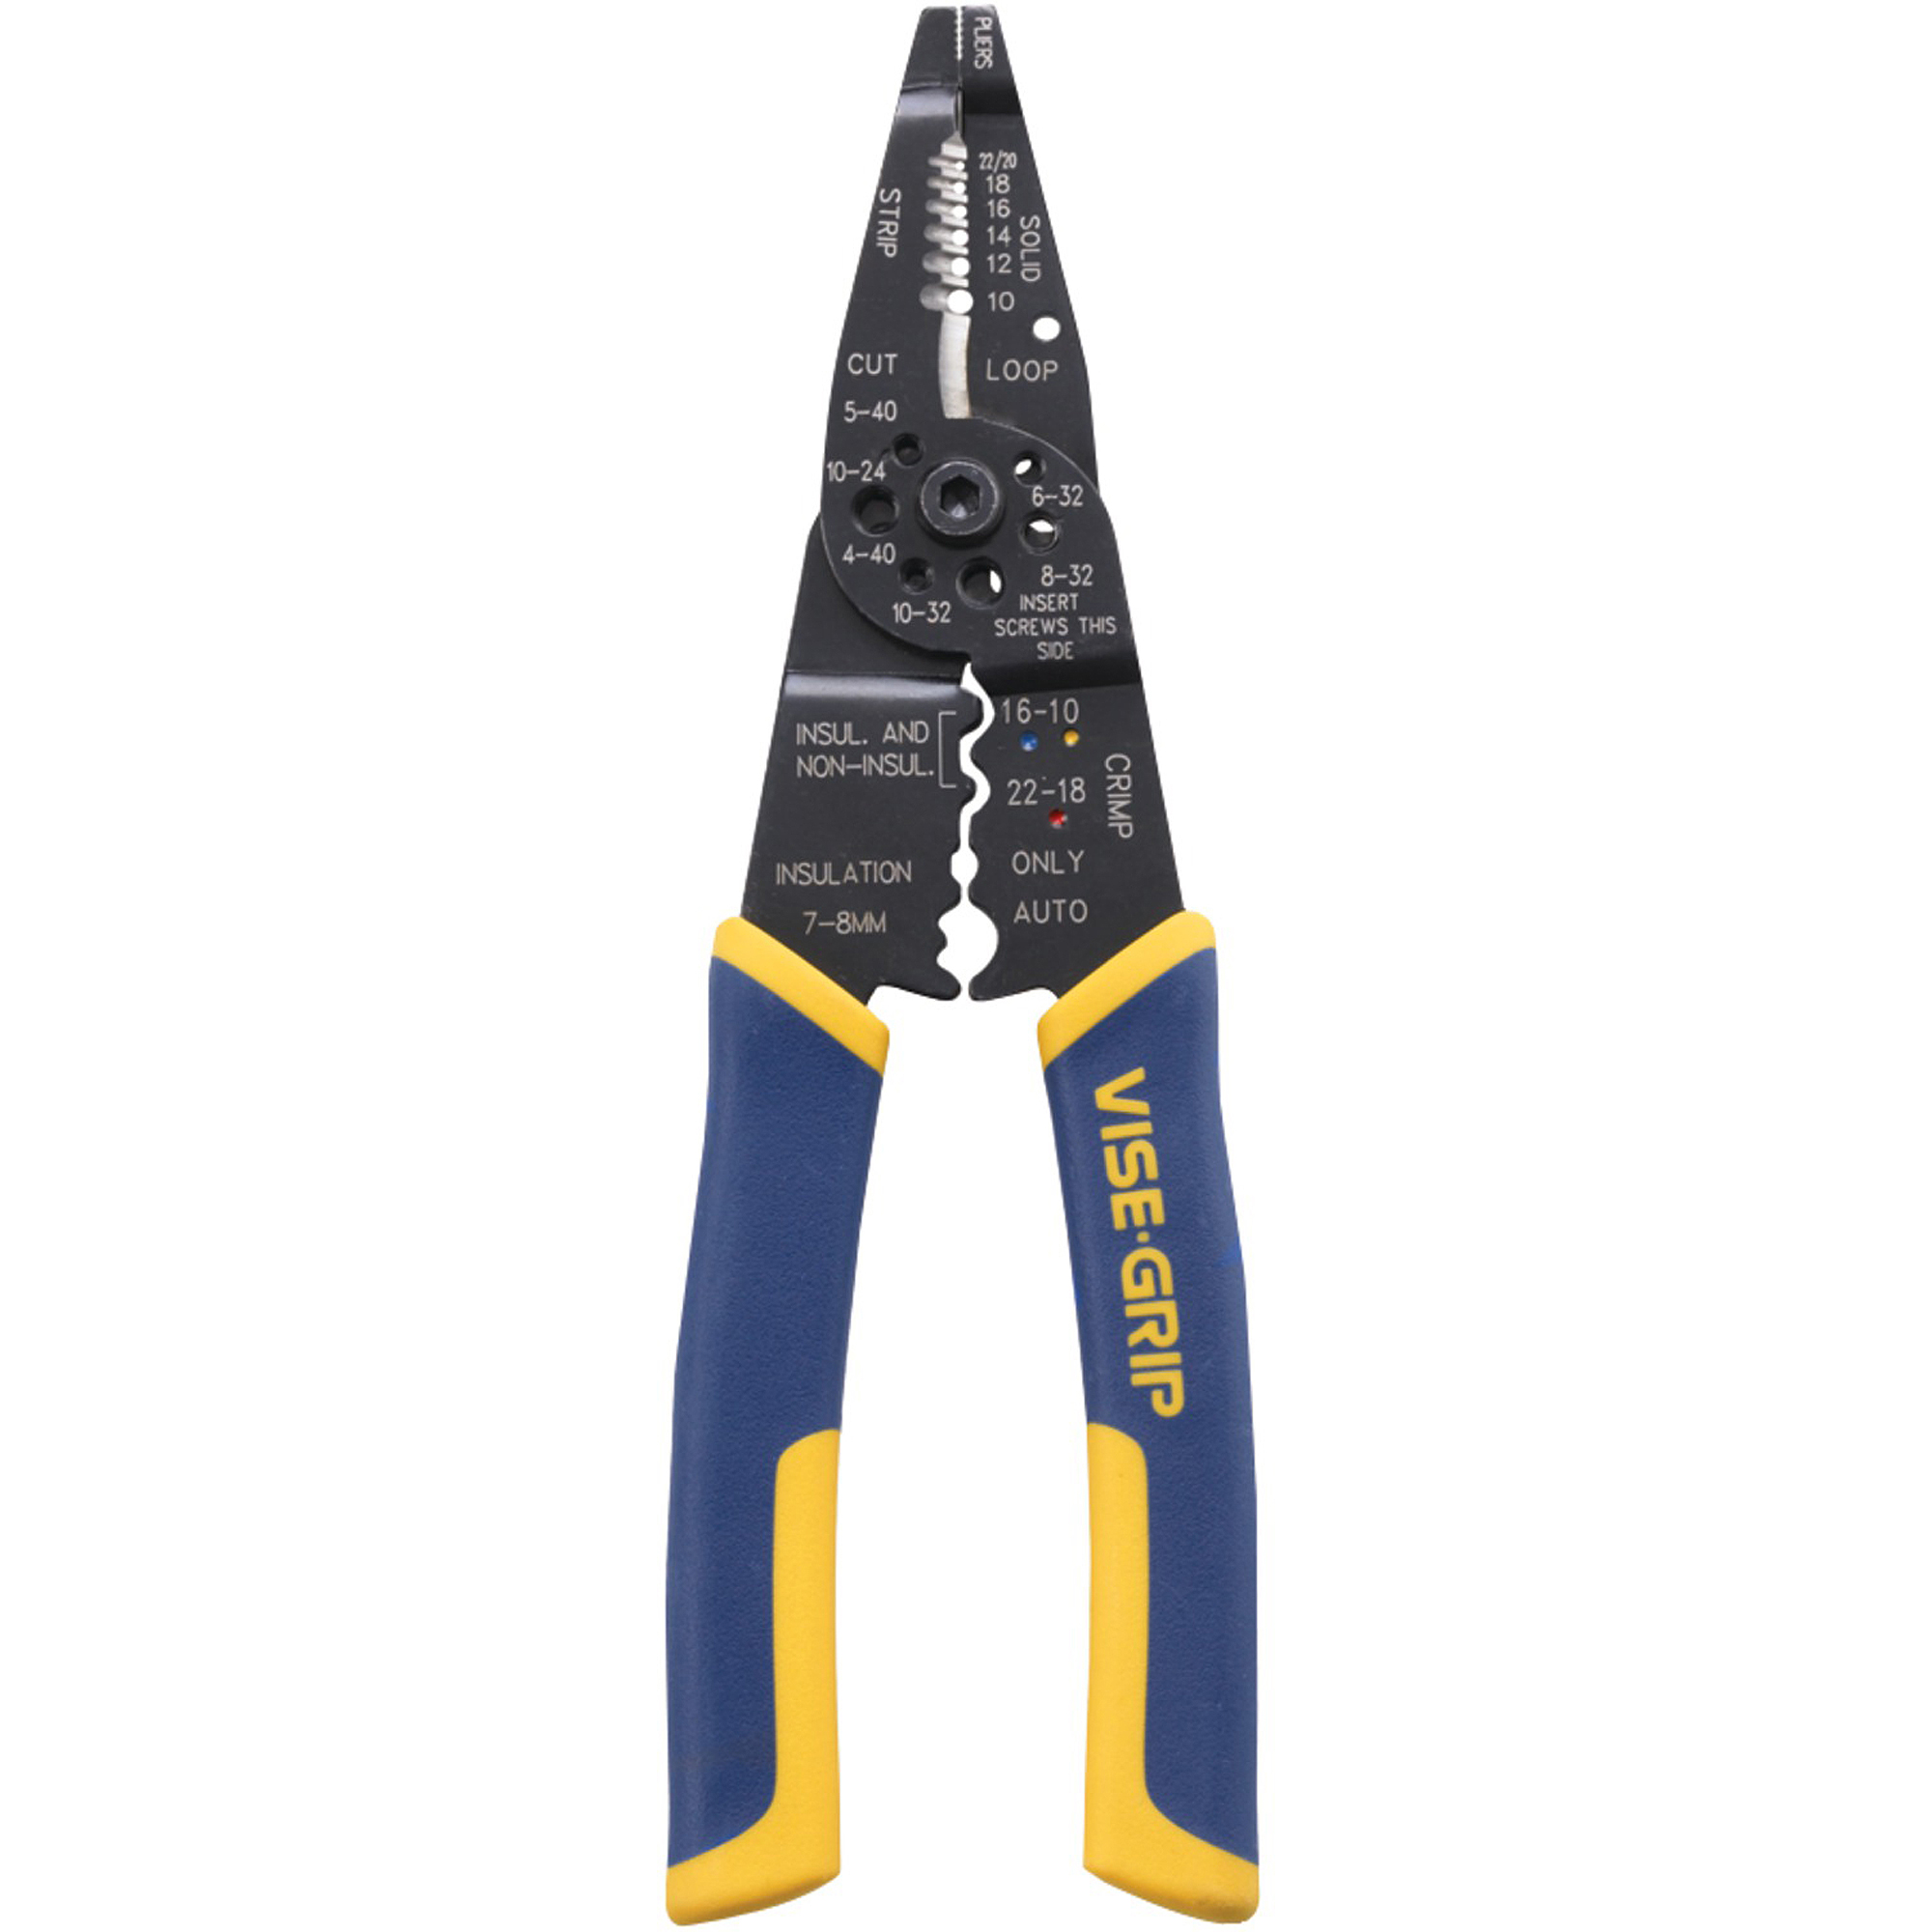 Have you ever done electrical work and carry 4 different elecrtical tools in your pocket? I have, and its not the most efficient thing. Well, here is the Irwin (Vice Grip) Electrical Multi Tool which combines pliers, wire cutter, wire crimper and more all in one tool!